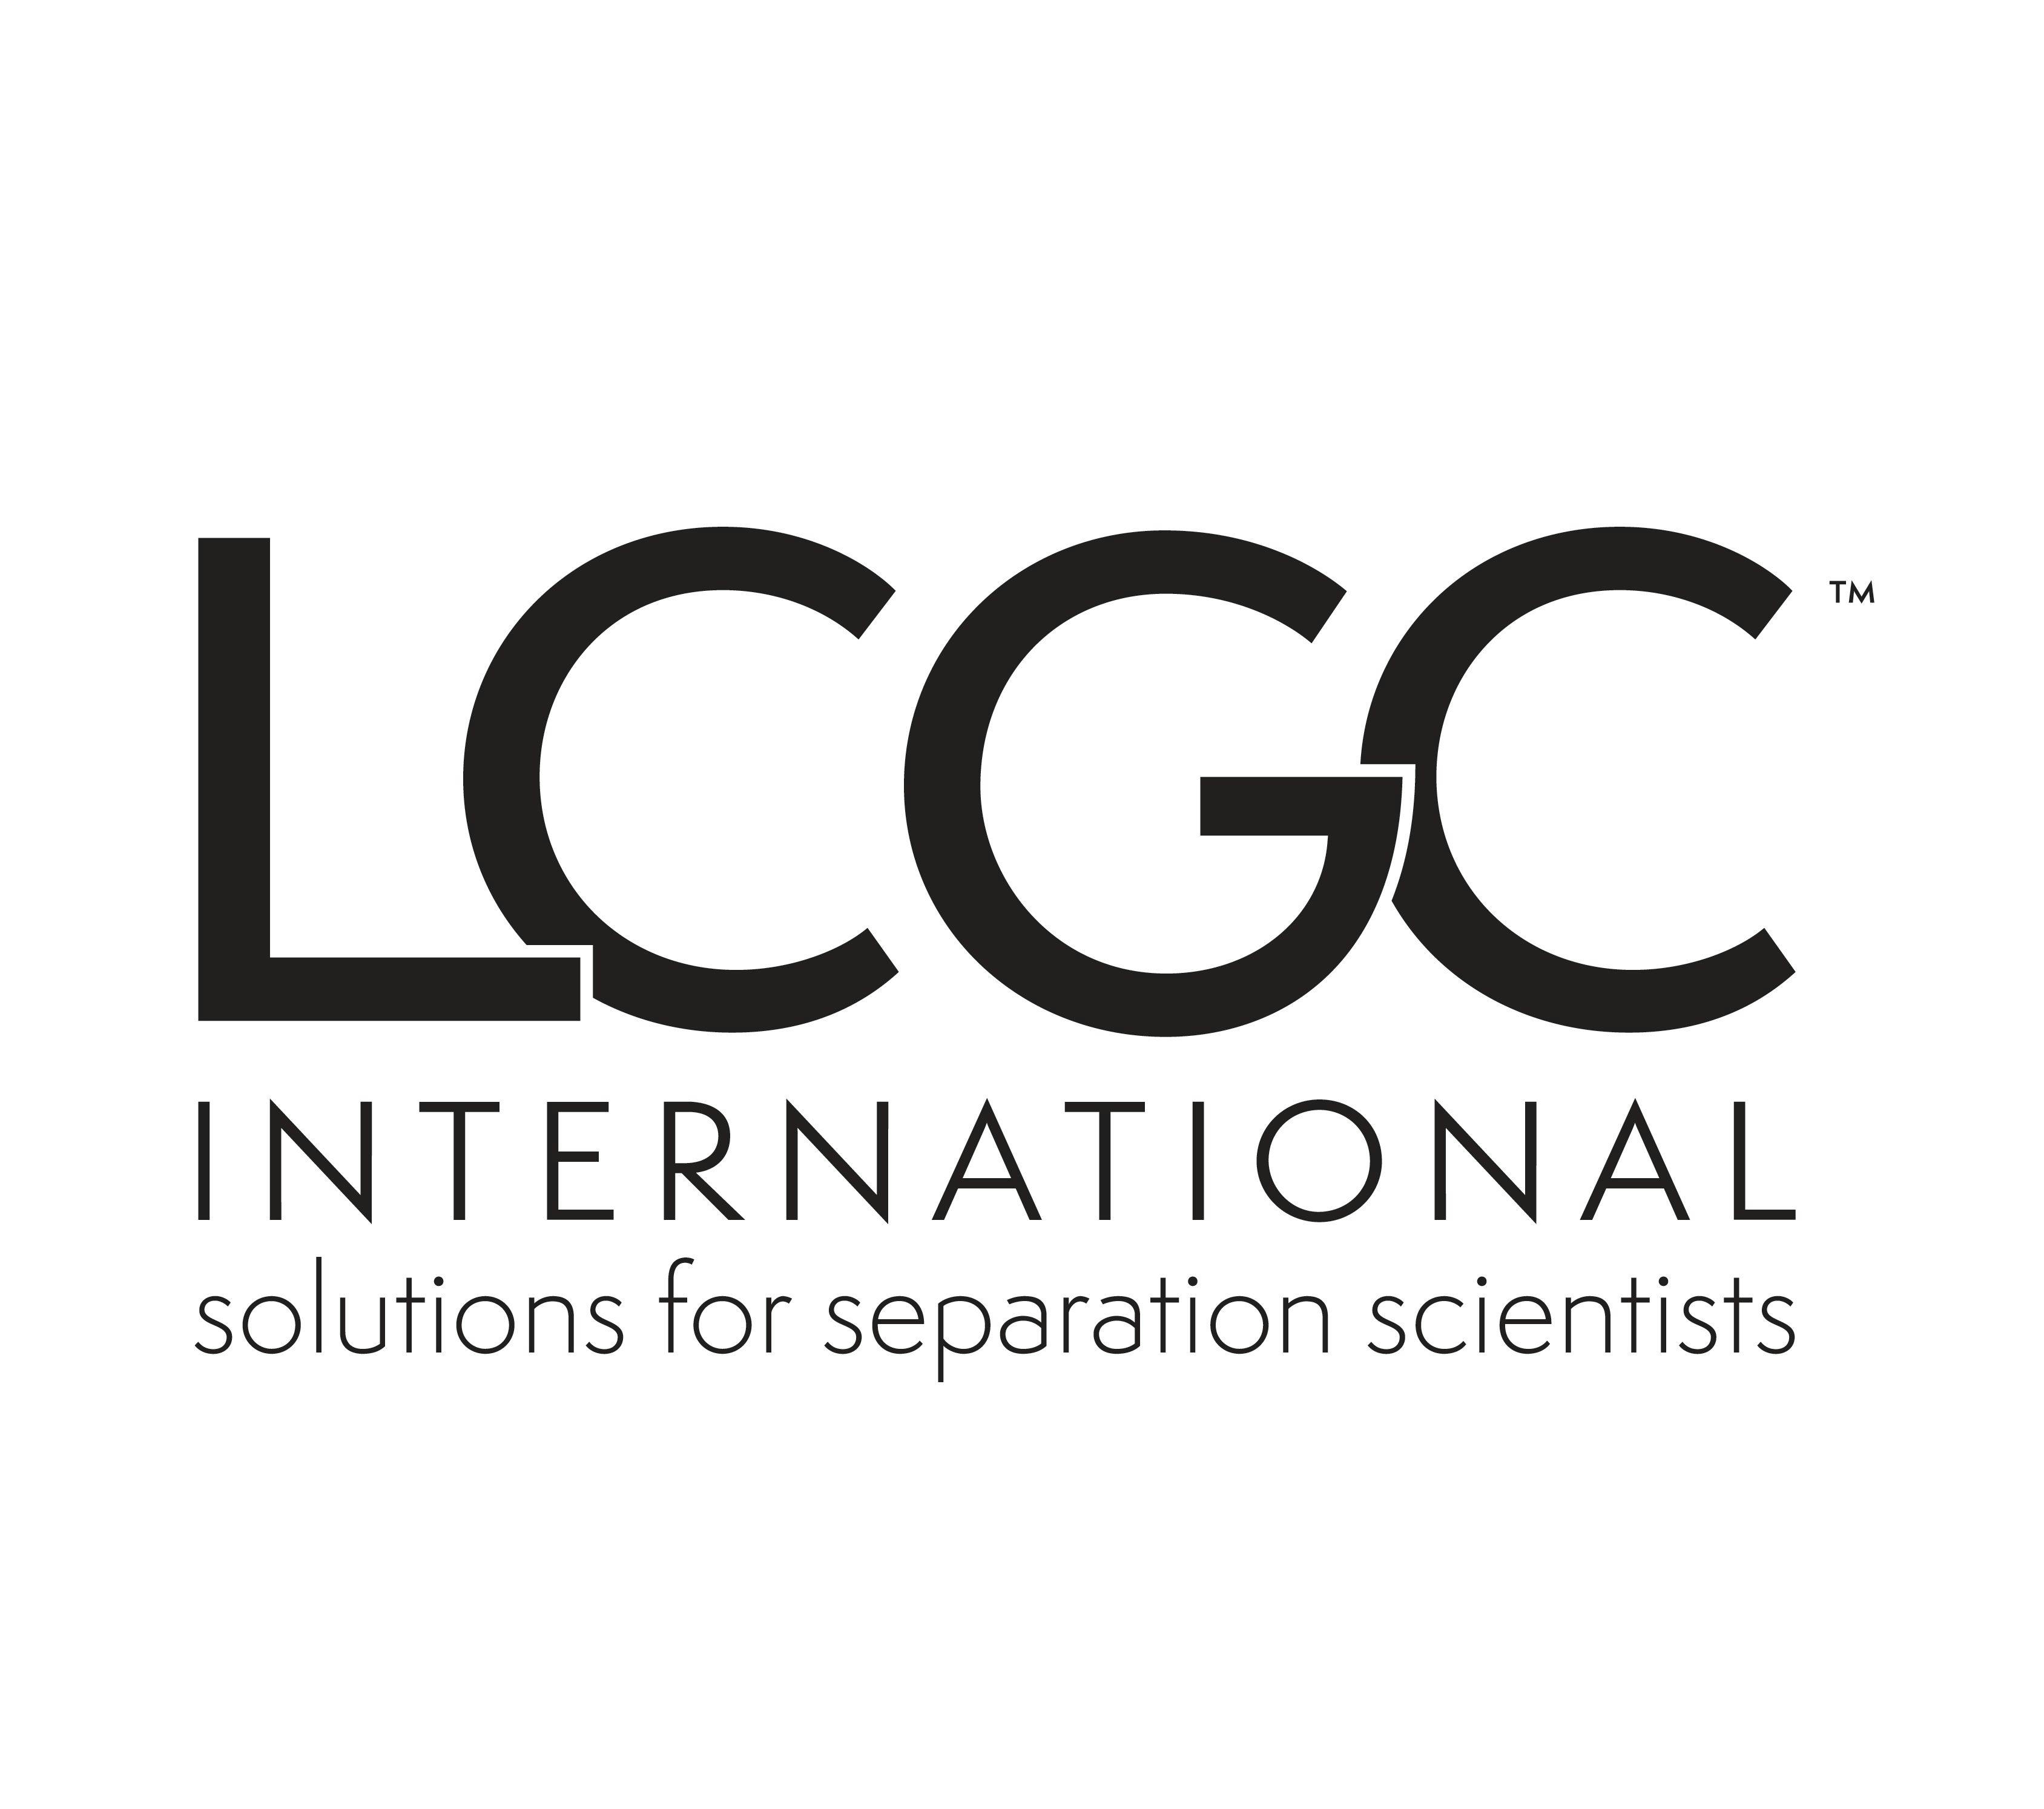 Call for Papers: Submit your paper to LCGC International